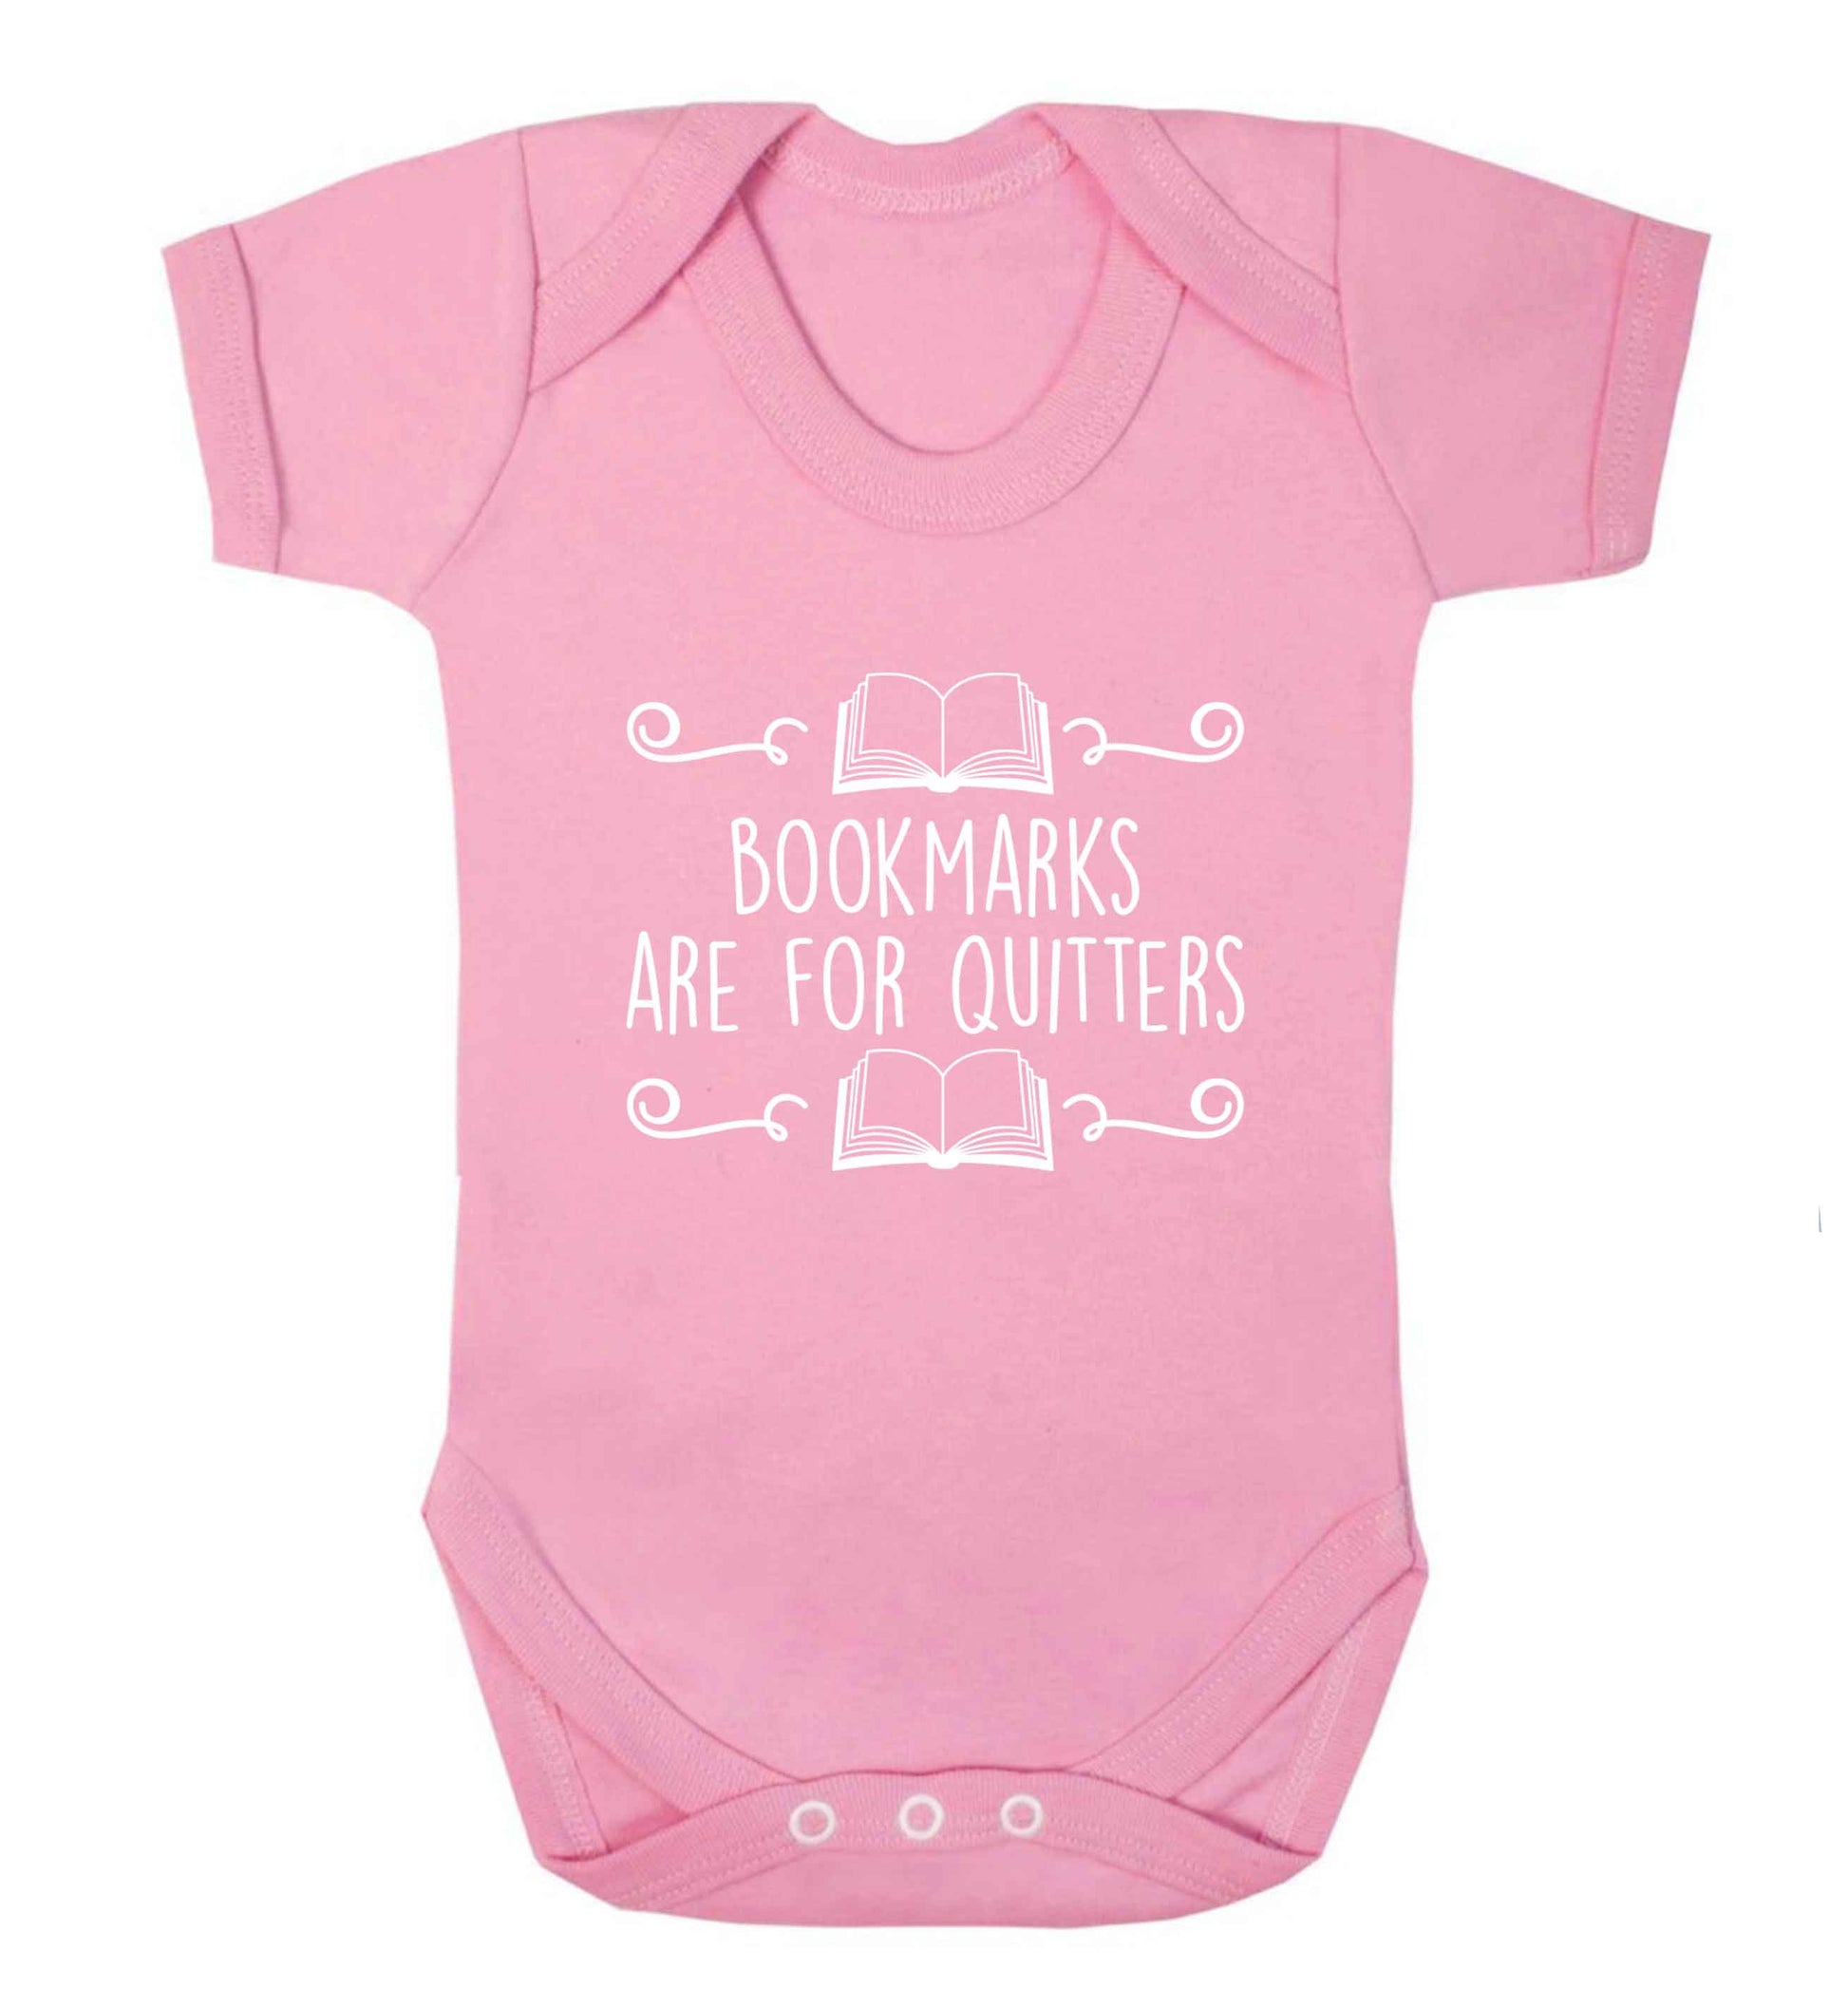 Bookmarks are for quitters baby vest pale pink 18-24 months